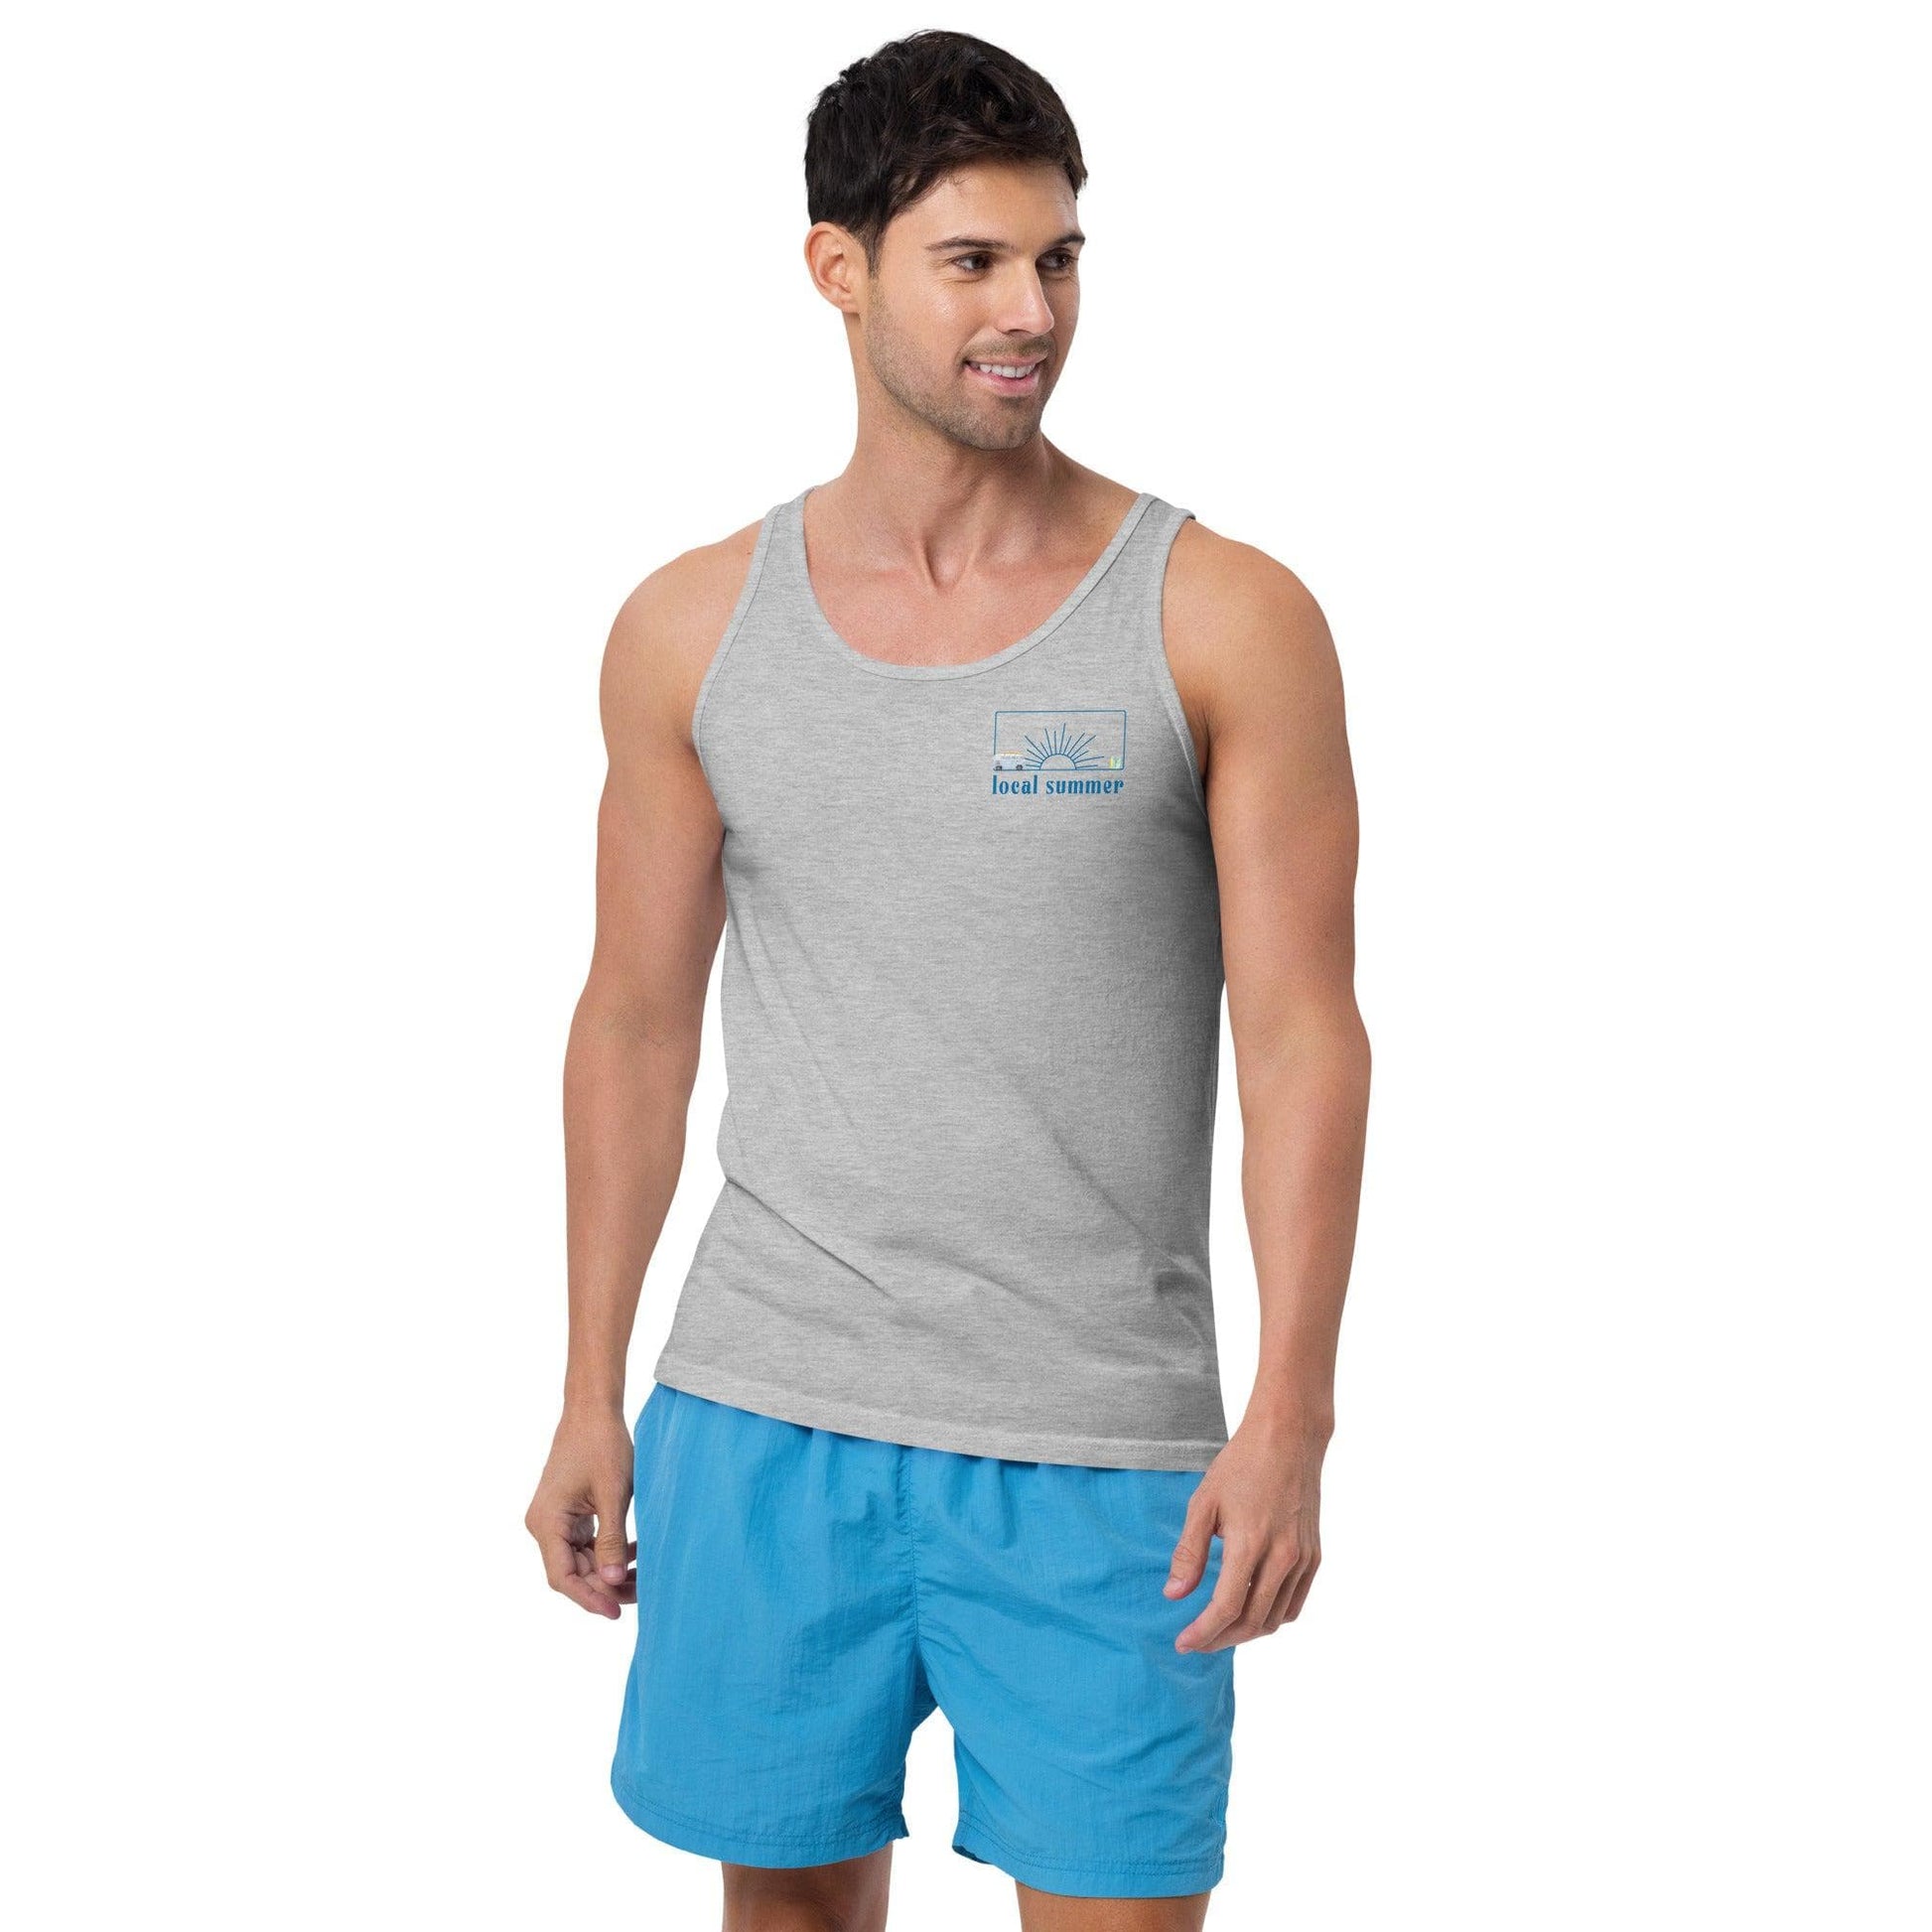 Local Summer Collective Shore Surfer (IYKYK) Unisex Tank Top